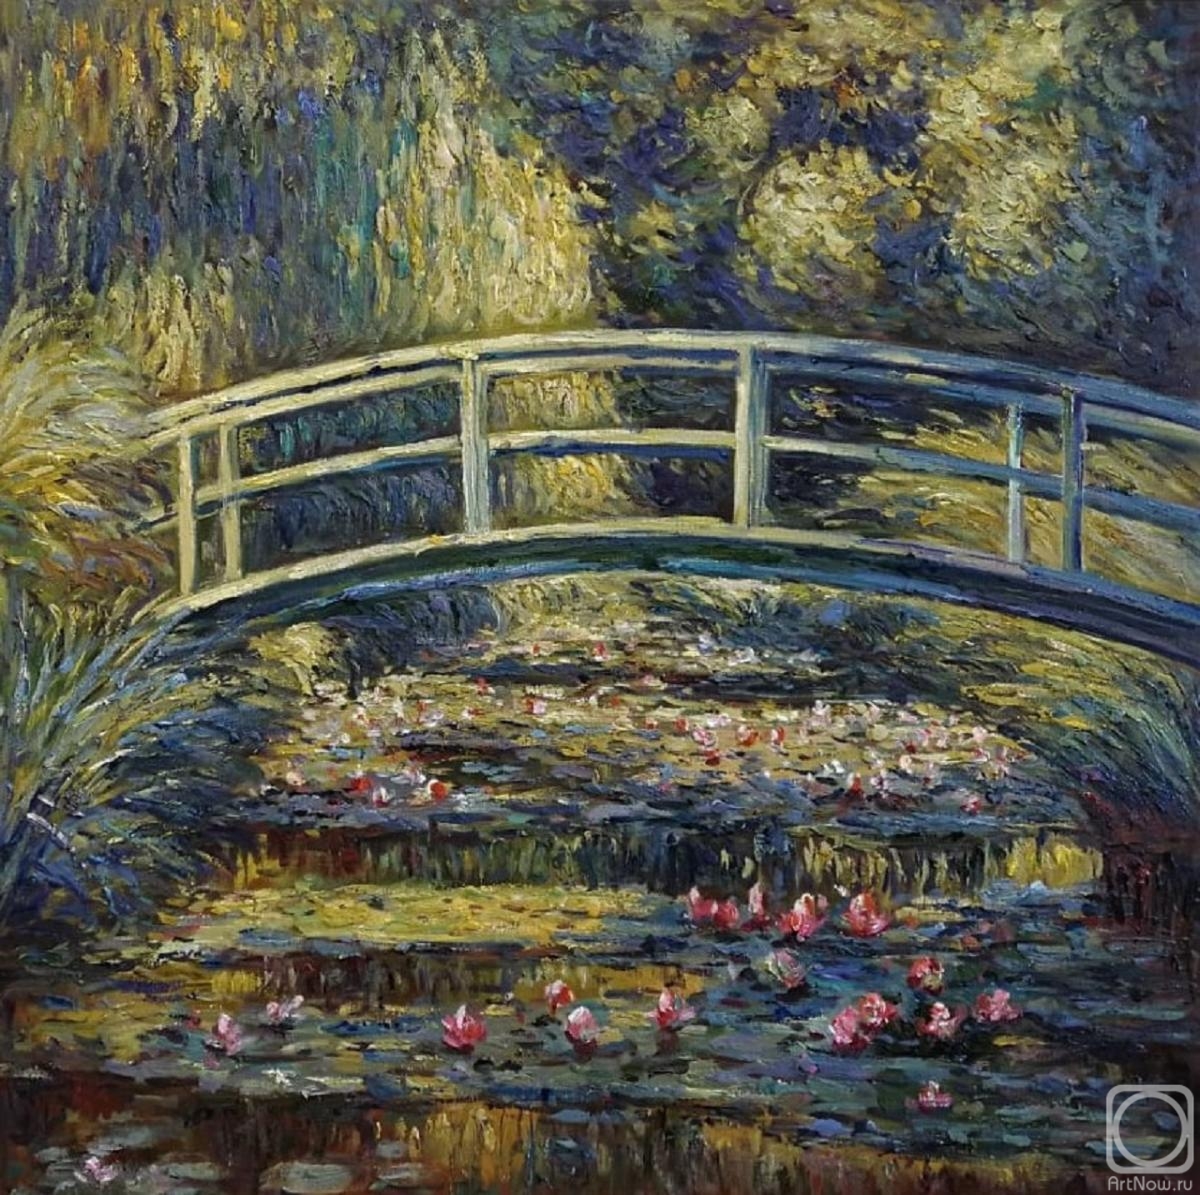 Kamskij Savelij. A copy of a Monet painting. Bridge by the pond with water lilies